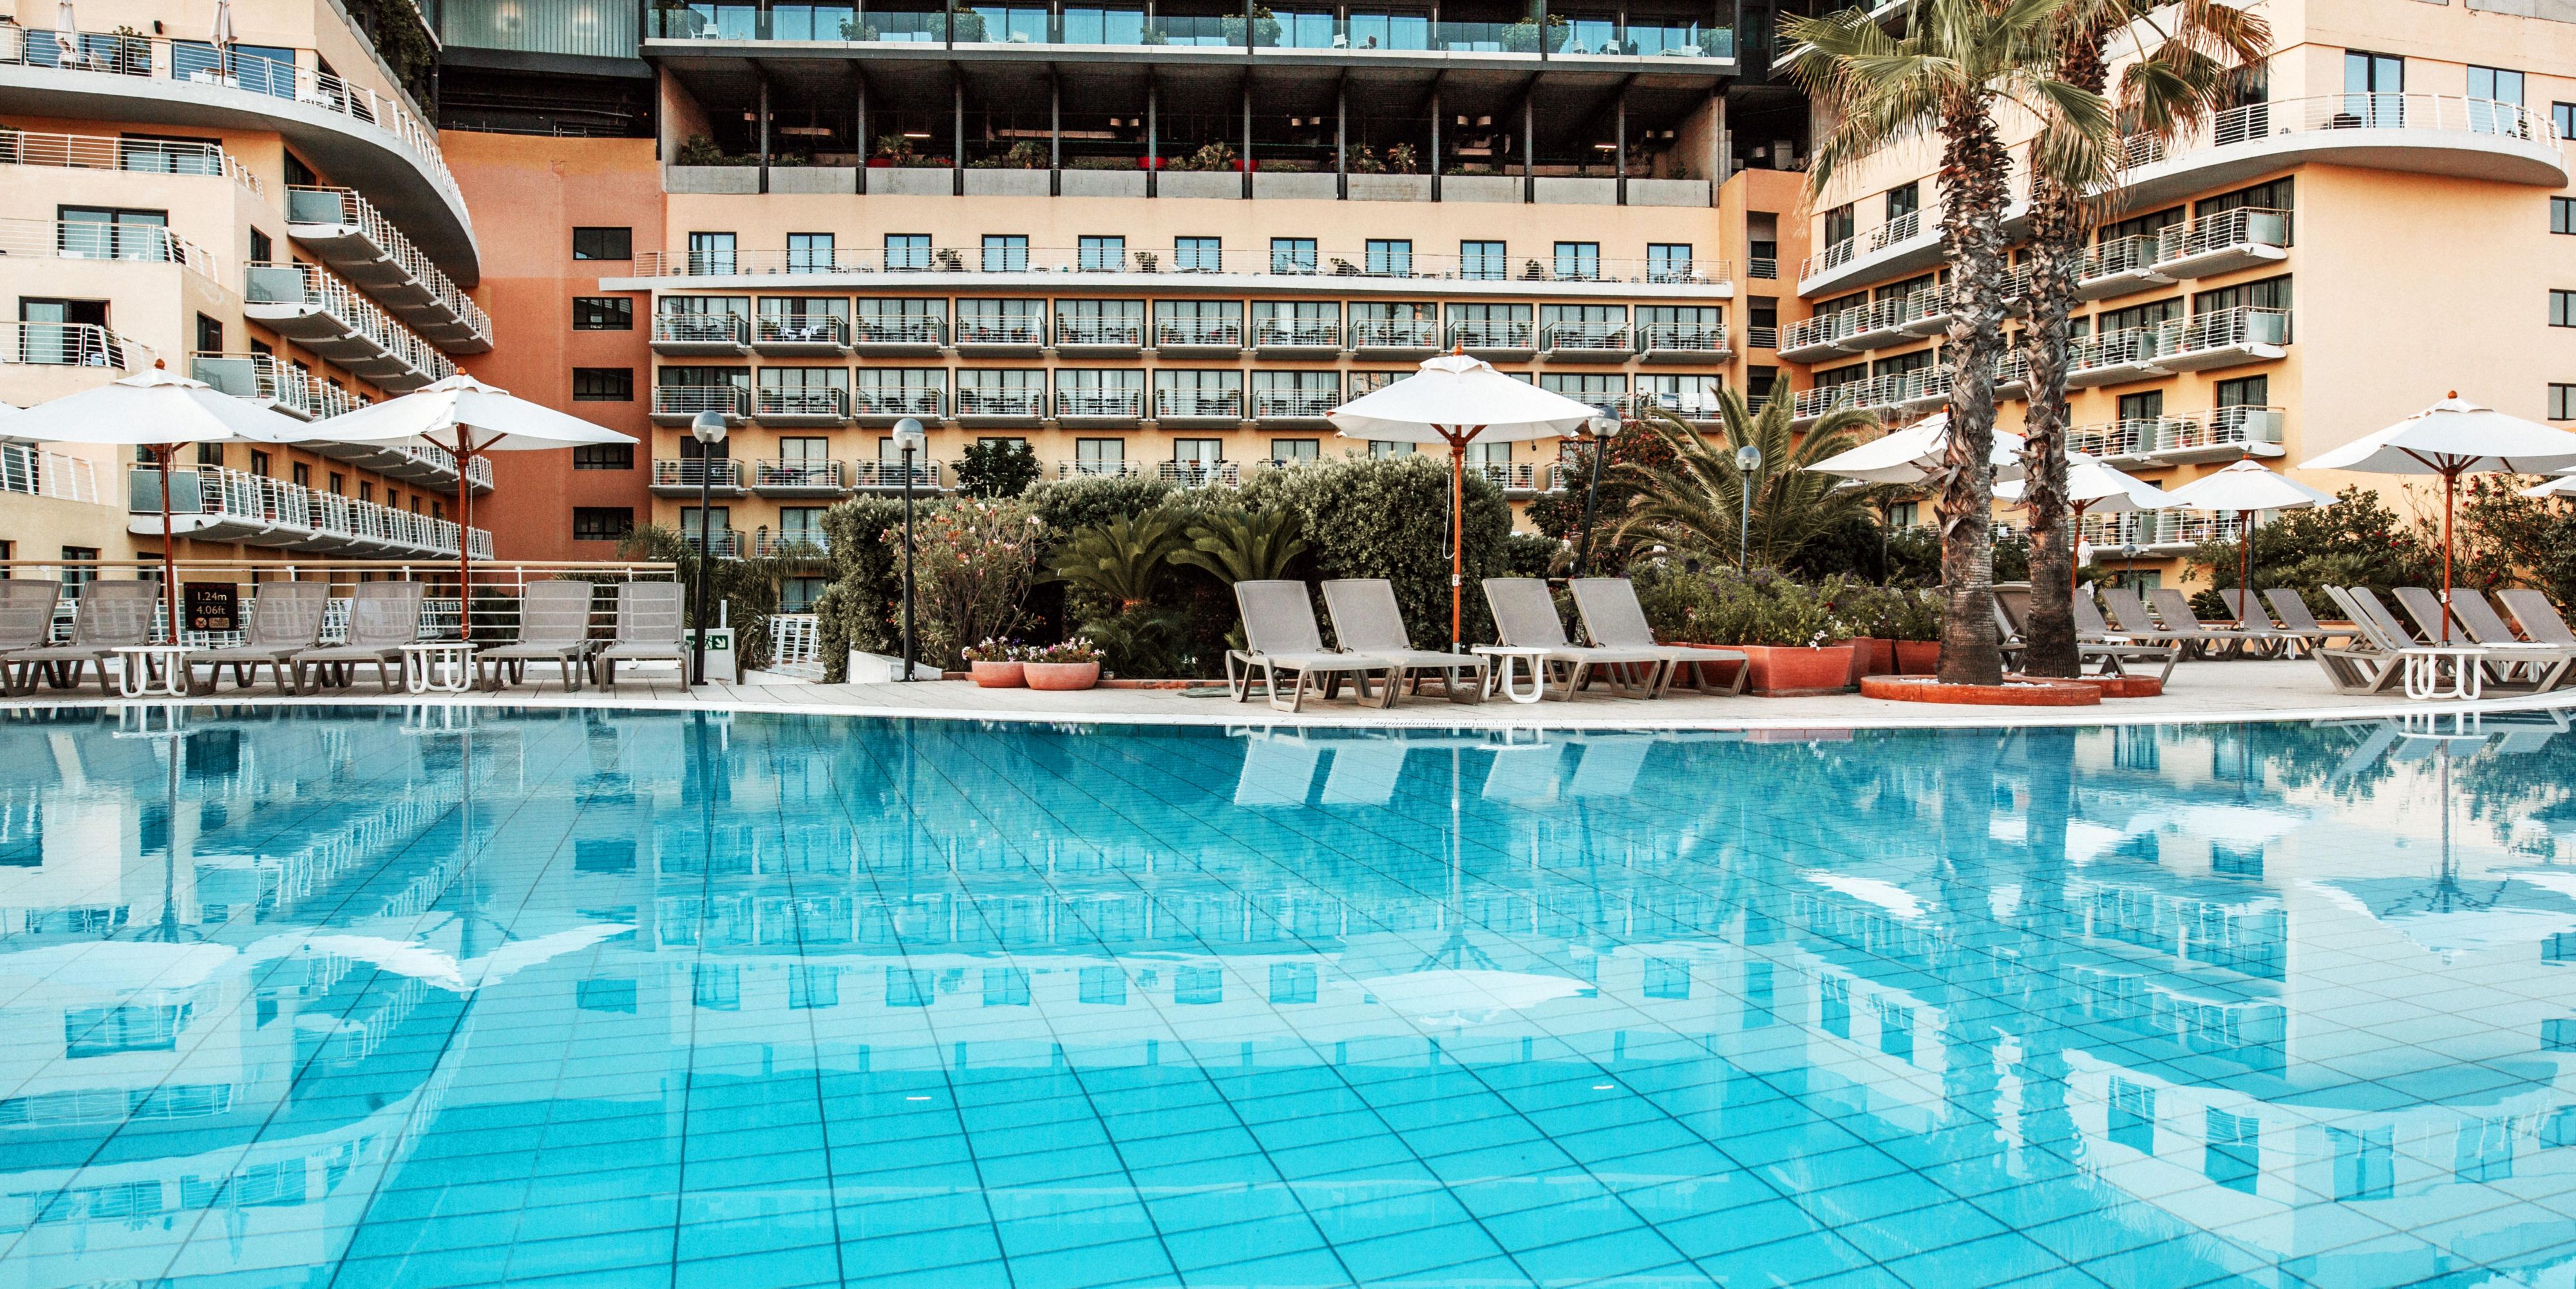 With every stay, get access to the outdoor pool, heated indoor pool for maximum comfort and relaxation. Guests can make use of Spa and Malta's largest gym - Cynergi.
The Outdoor Pool is closed due to the cold weather.